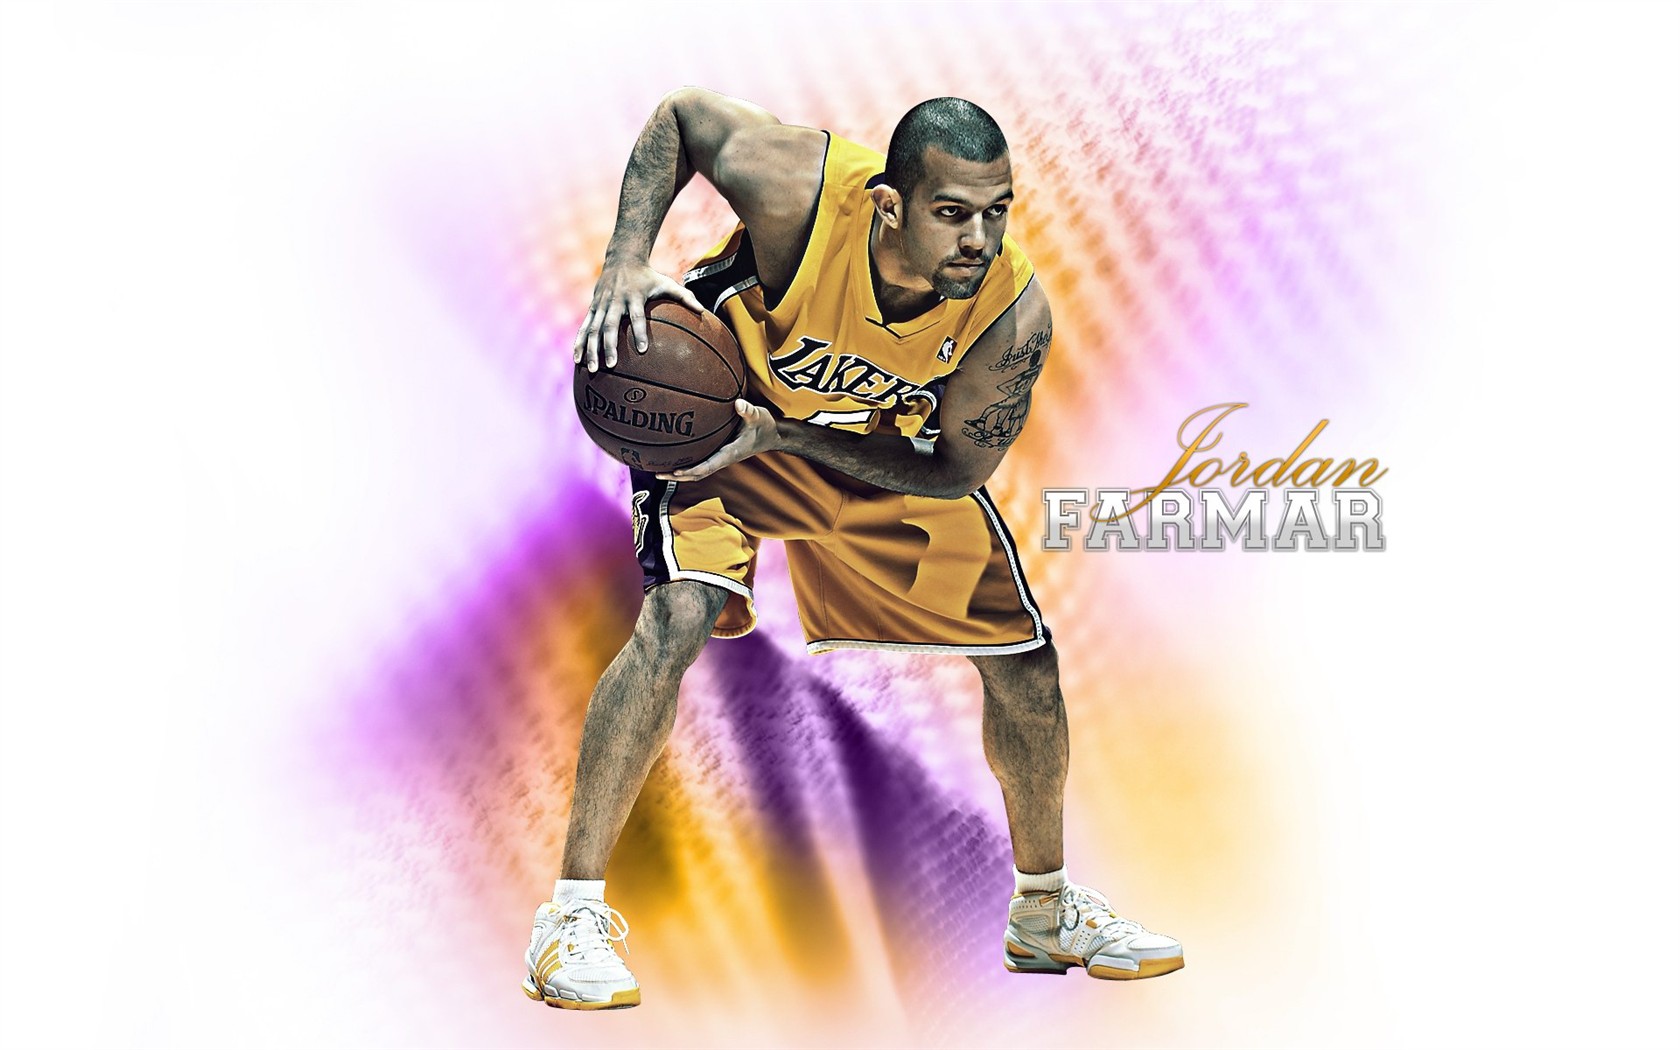 Los Angeles Lakers Wallpaper Oficial #11 - 1680x1050